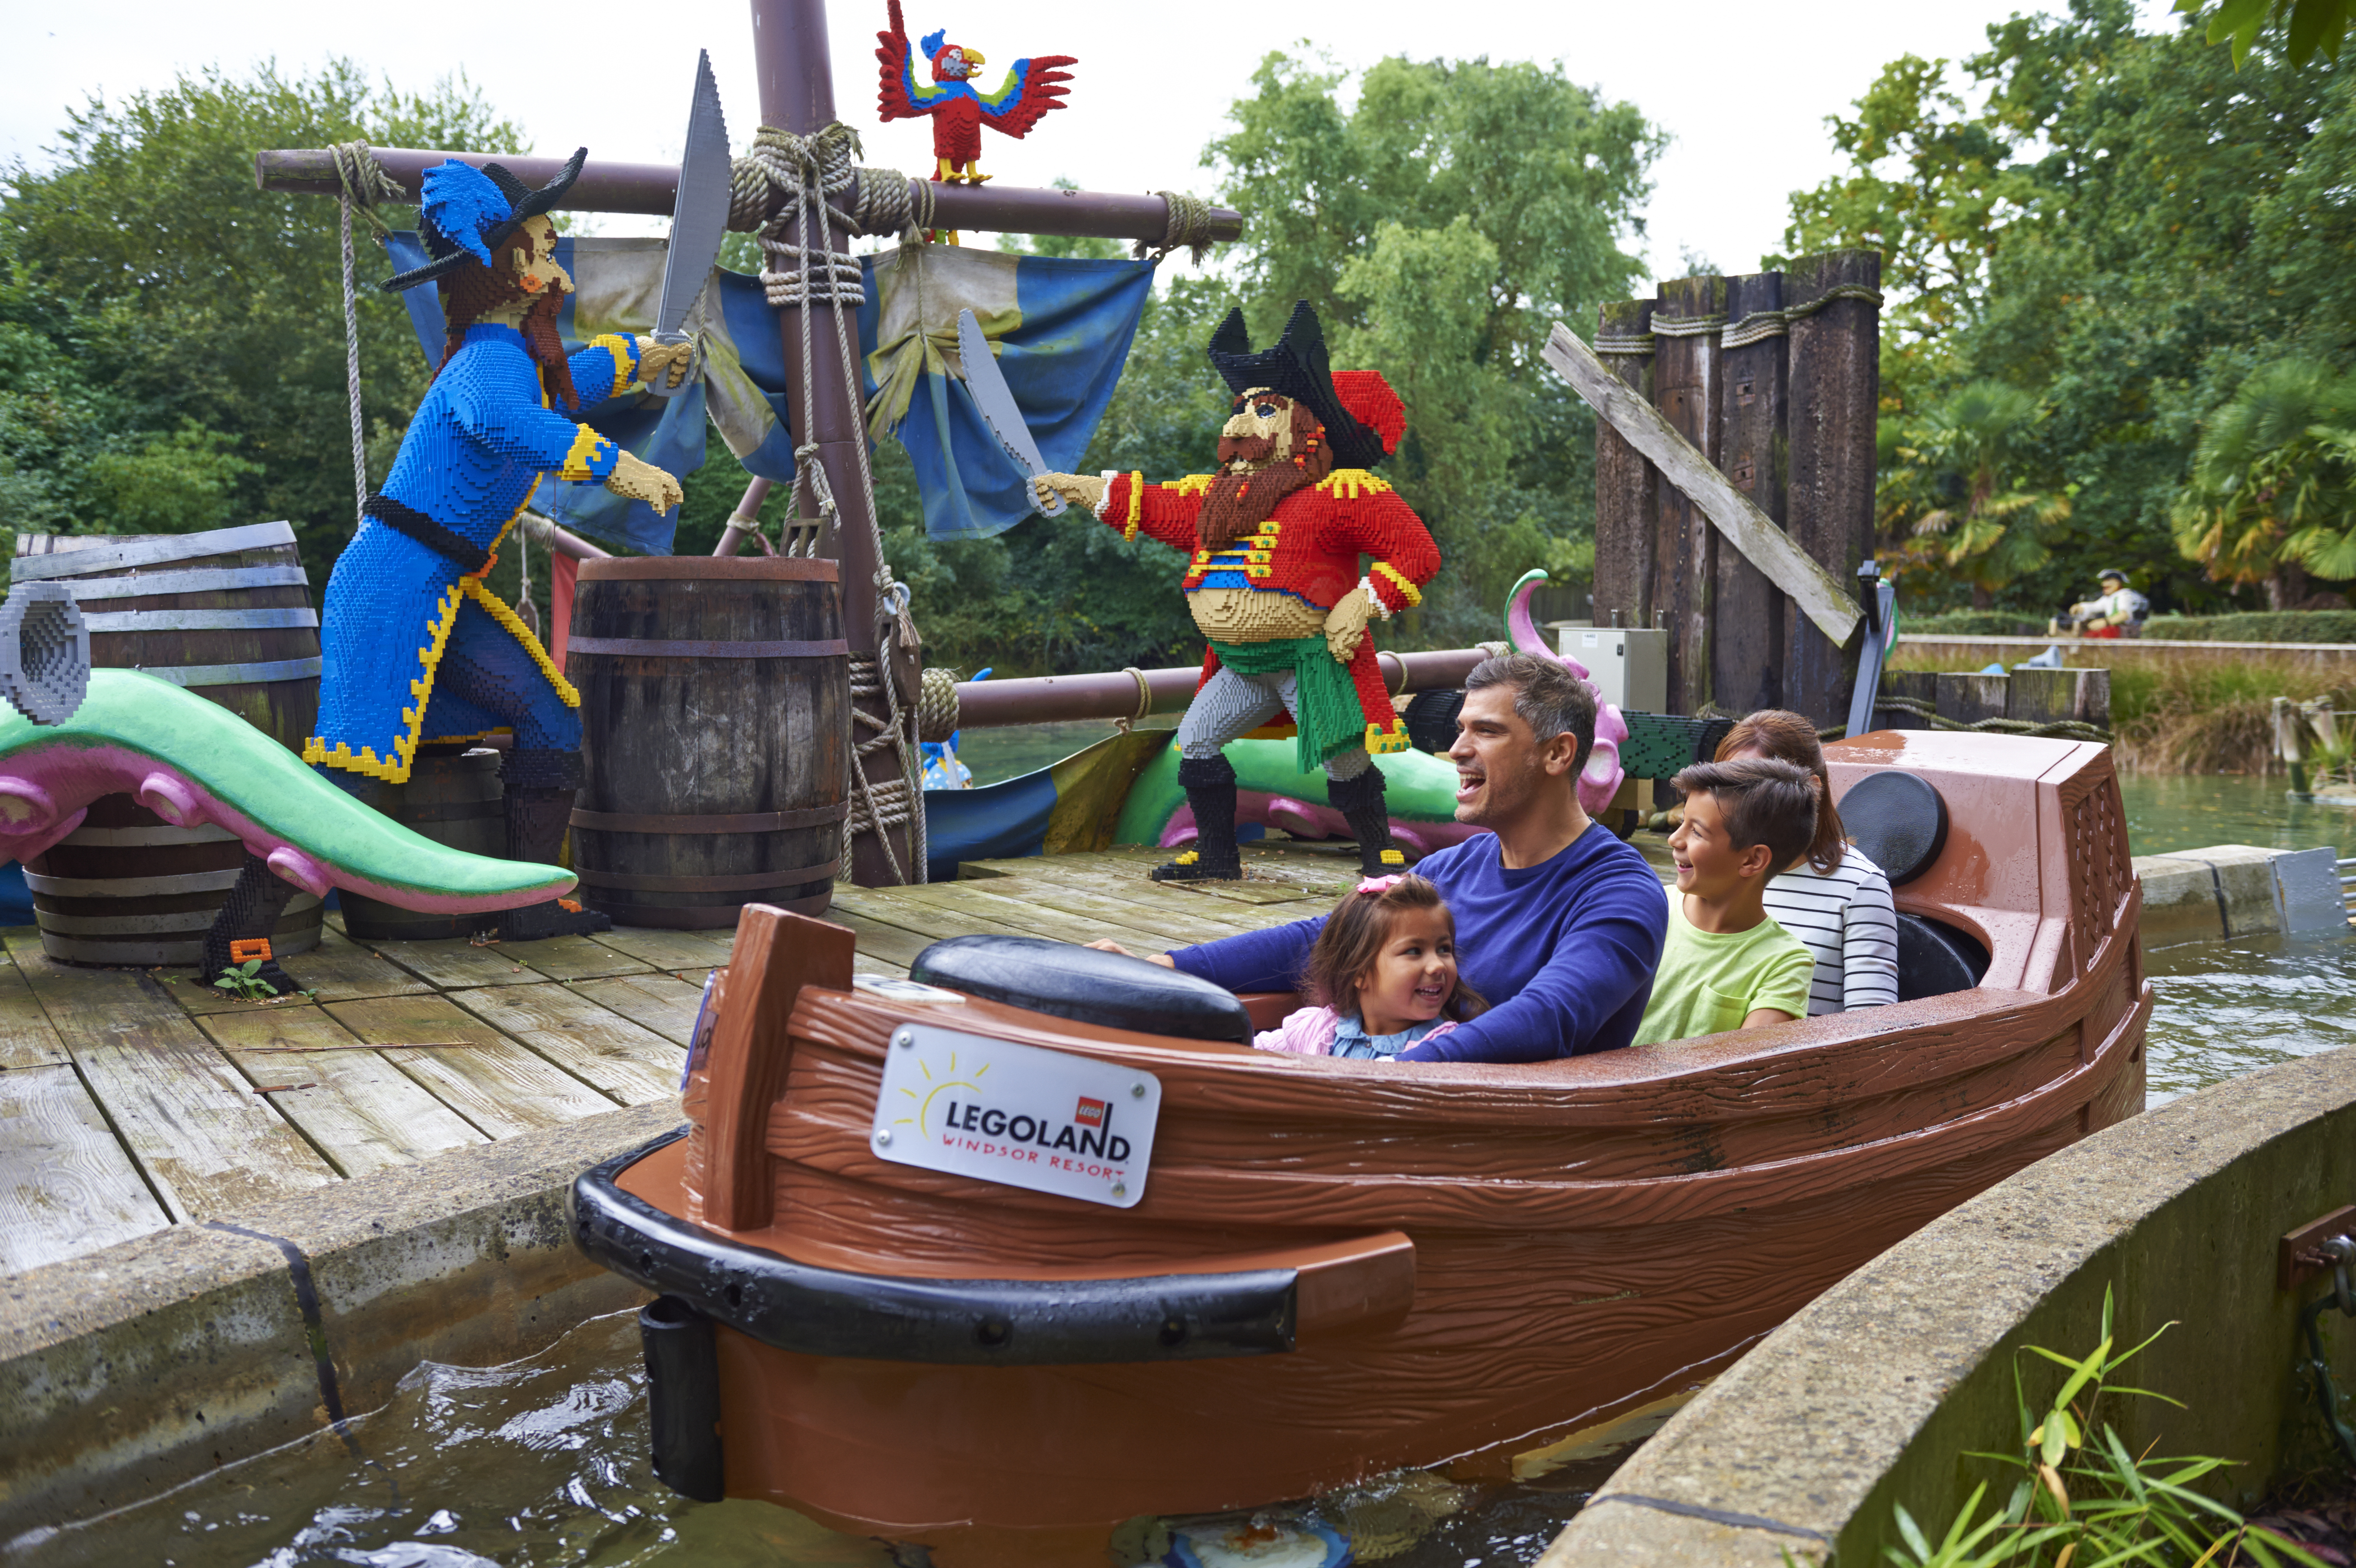 Legoland Windsor Pirate Falls Ride with dad and son in boat